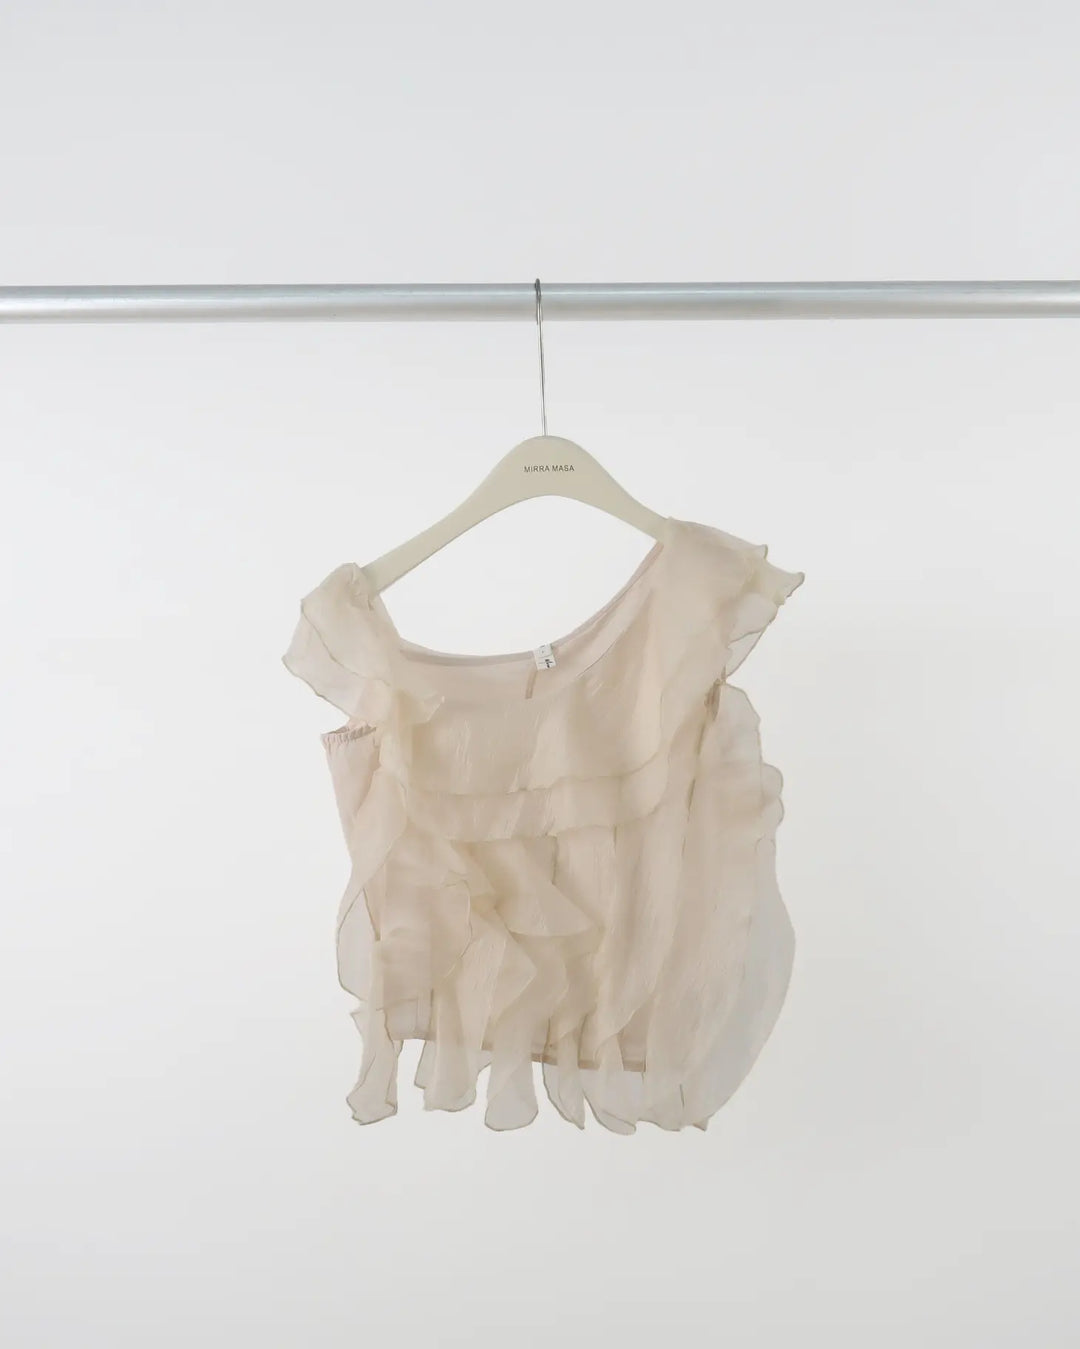 An image of a  Almond-One-Size 23368 Ruffled Top by  Mirra Masa